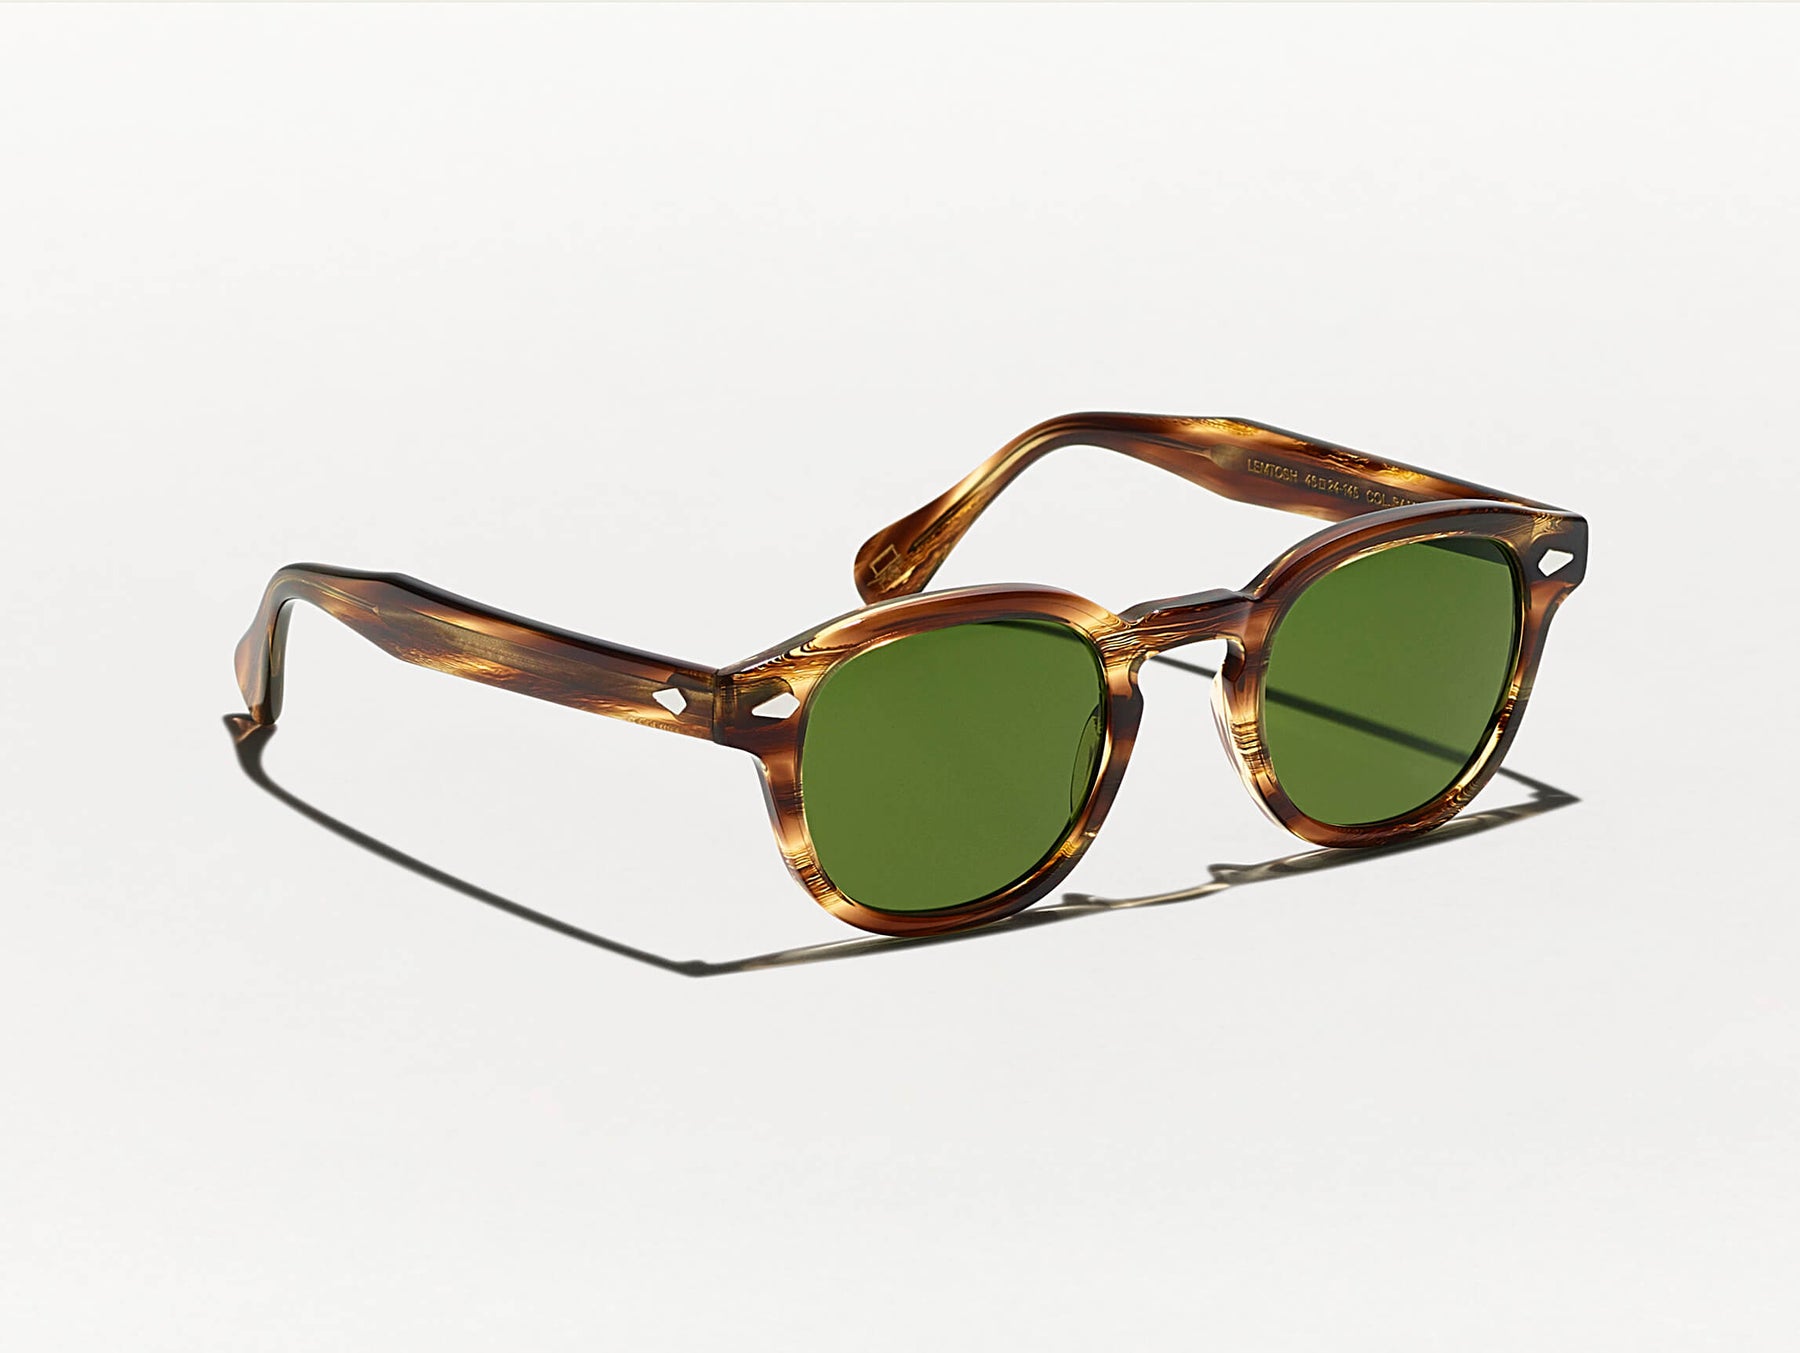 The LEMTOSH SUN in Bamboo with Calibar Green Glass Lenses